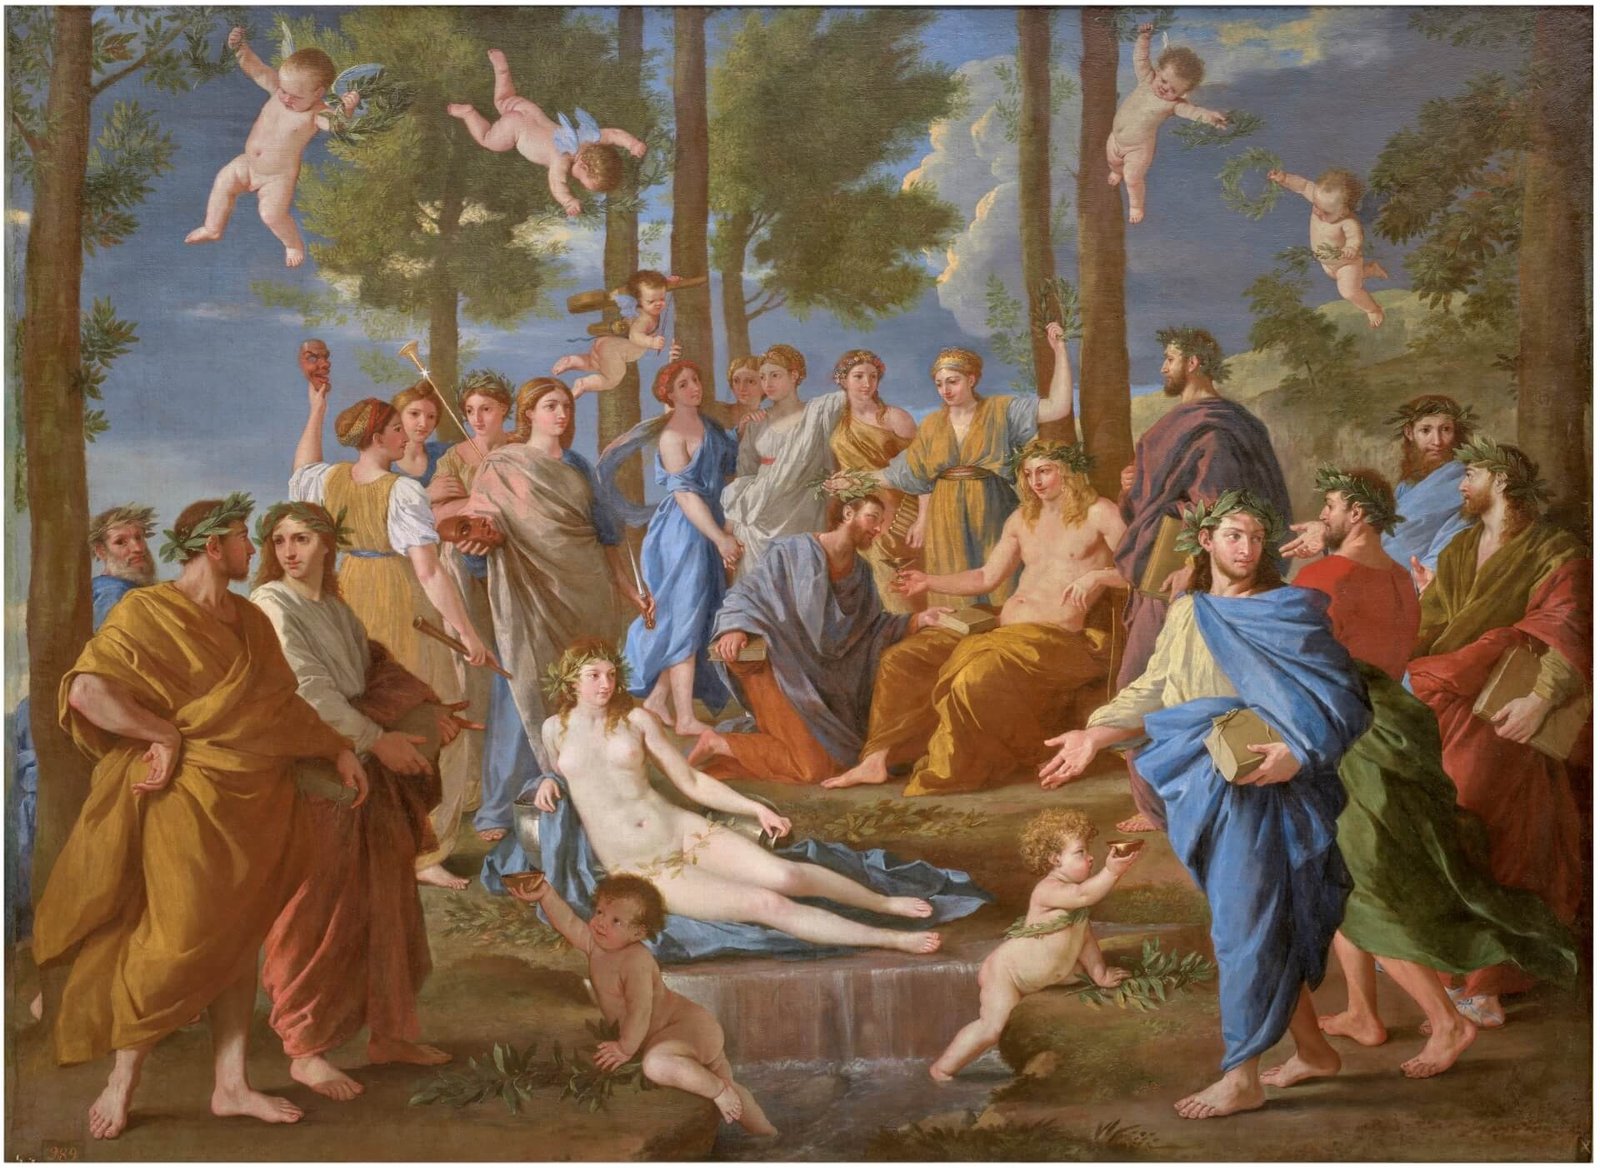 This painting represents Apollo, surrounded by his Muses on Mount Parnassus.